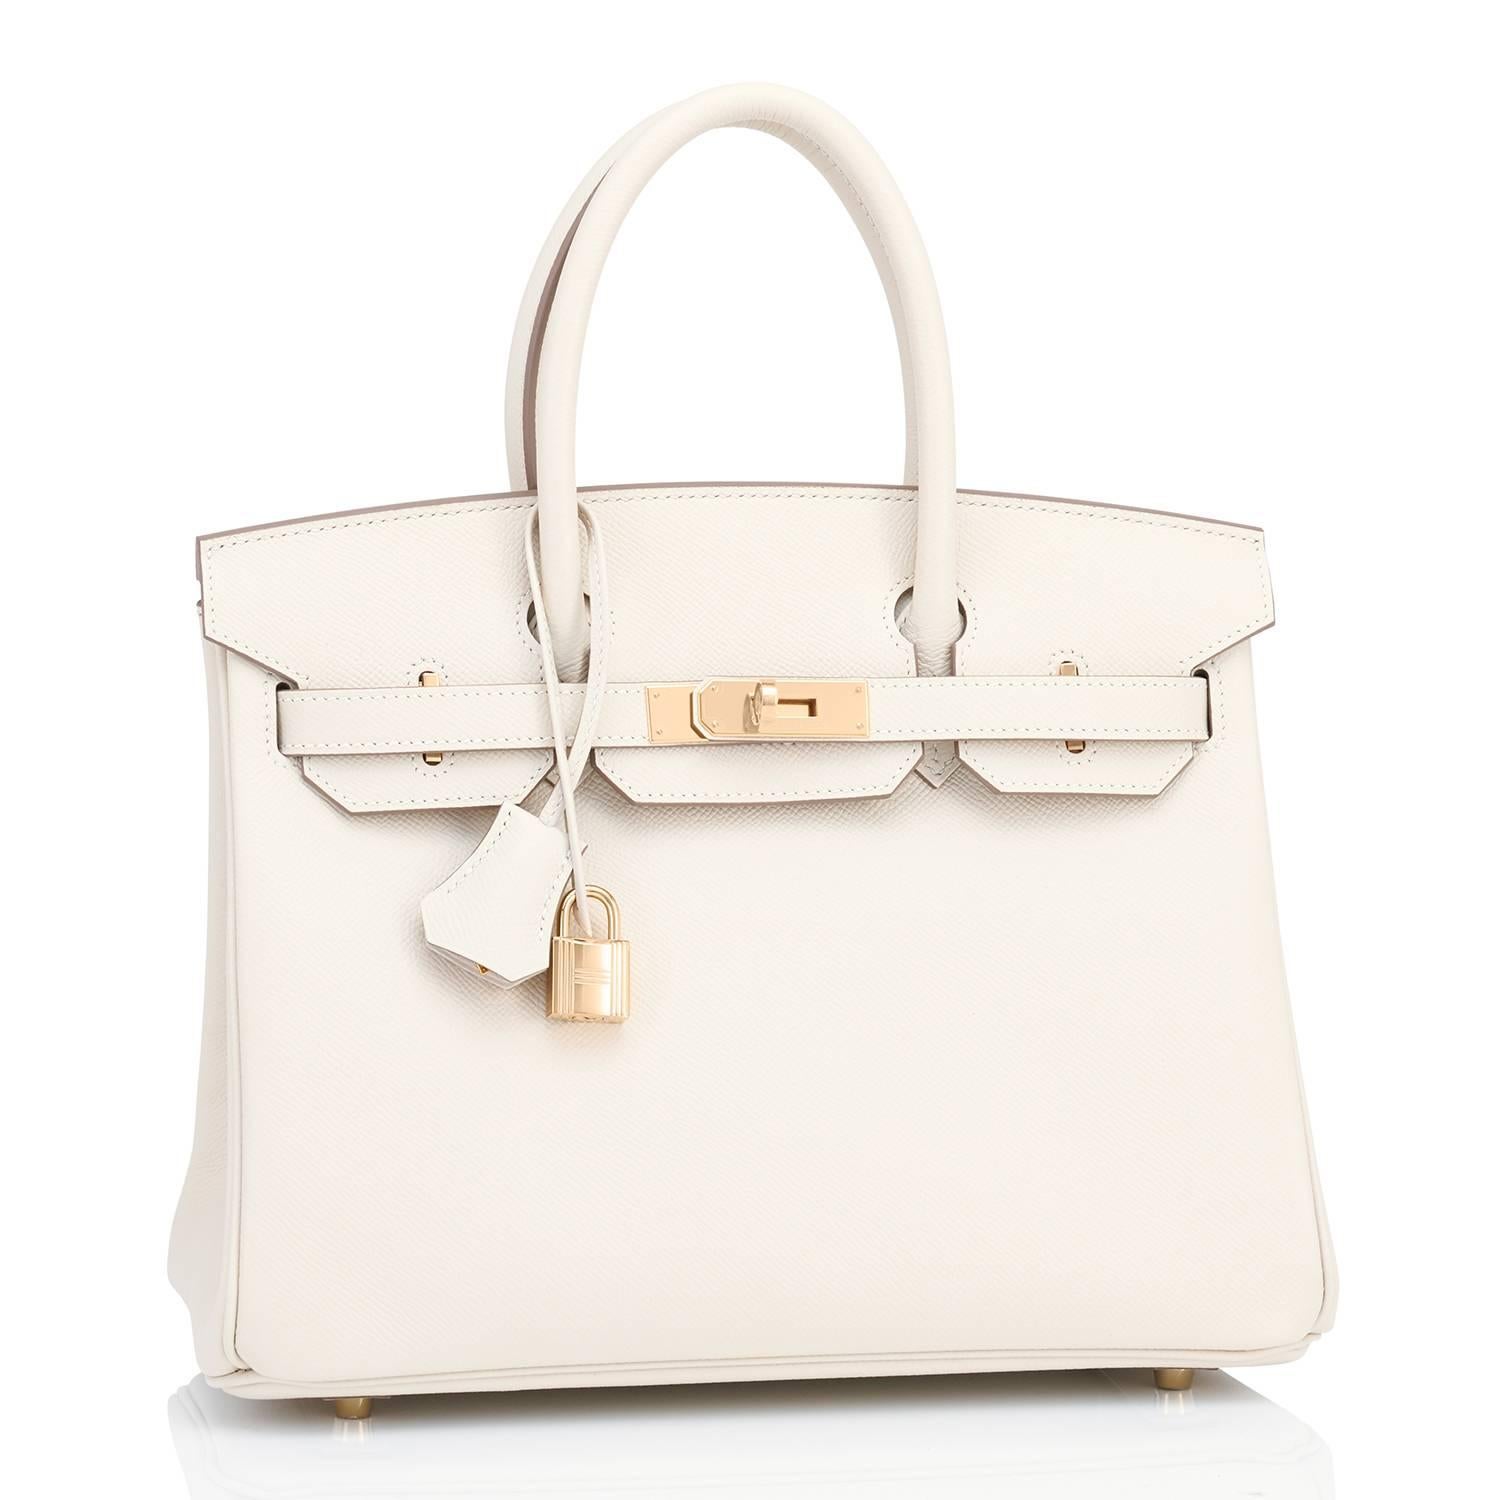 Hermes Craie 30cm Birkin Epsom Gold Hardware Off White 
New or Never Used. Pristine Condition (with plastic on hardware)
Perfect gift! Comes in full set with lock, keys, clochette, sleeper, raincoat, and Hermes box.
Stunning Craie is the